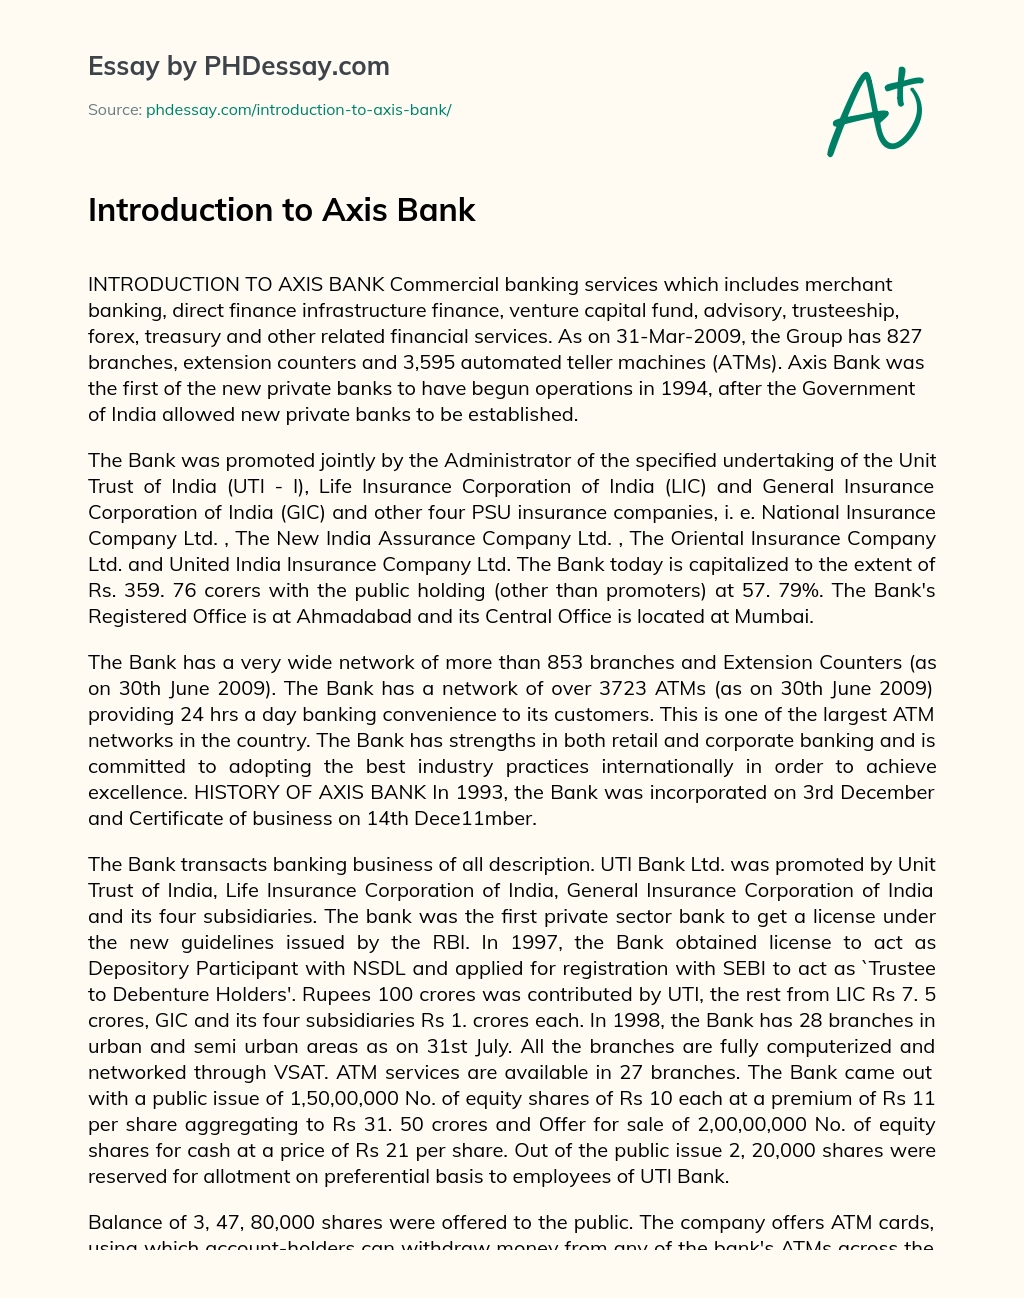 Introduction to Axis Bank essay